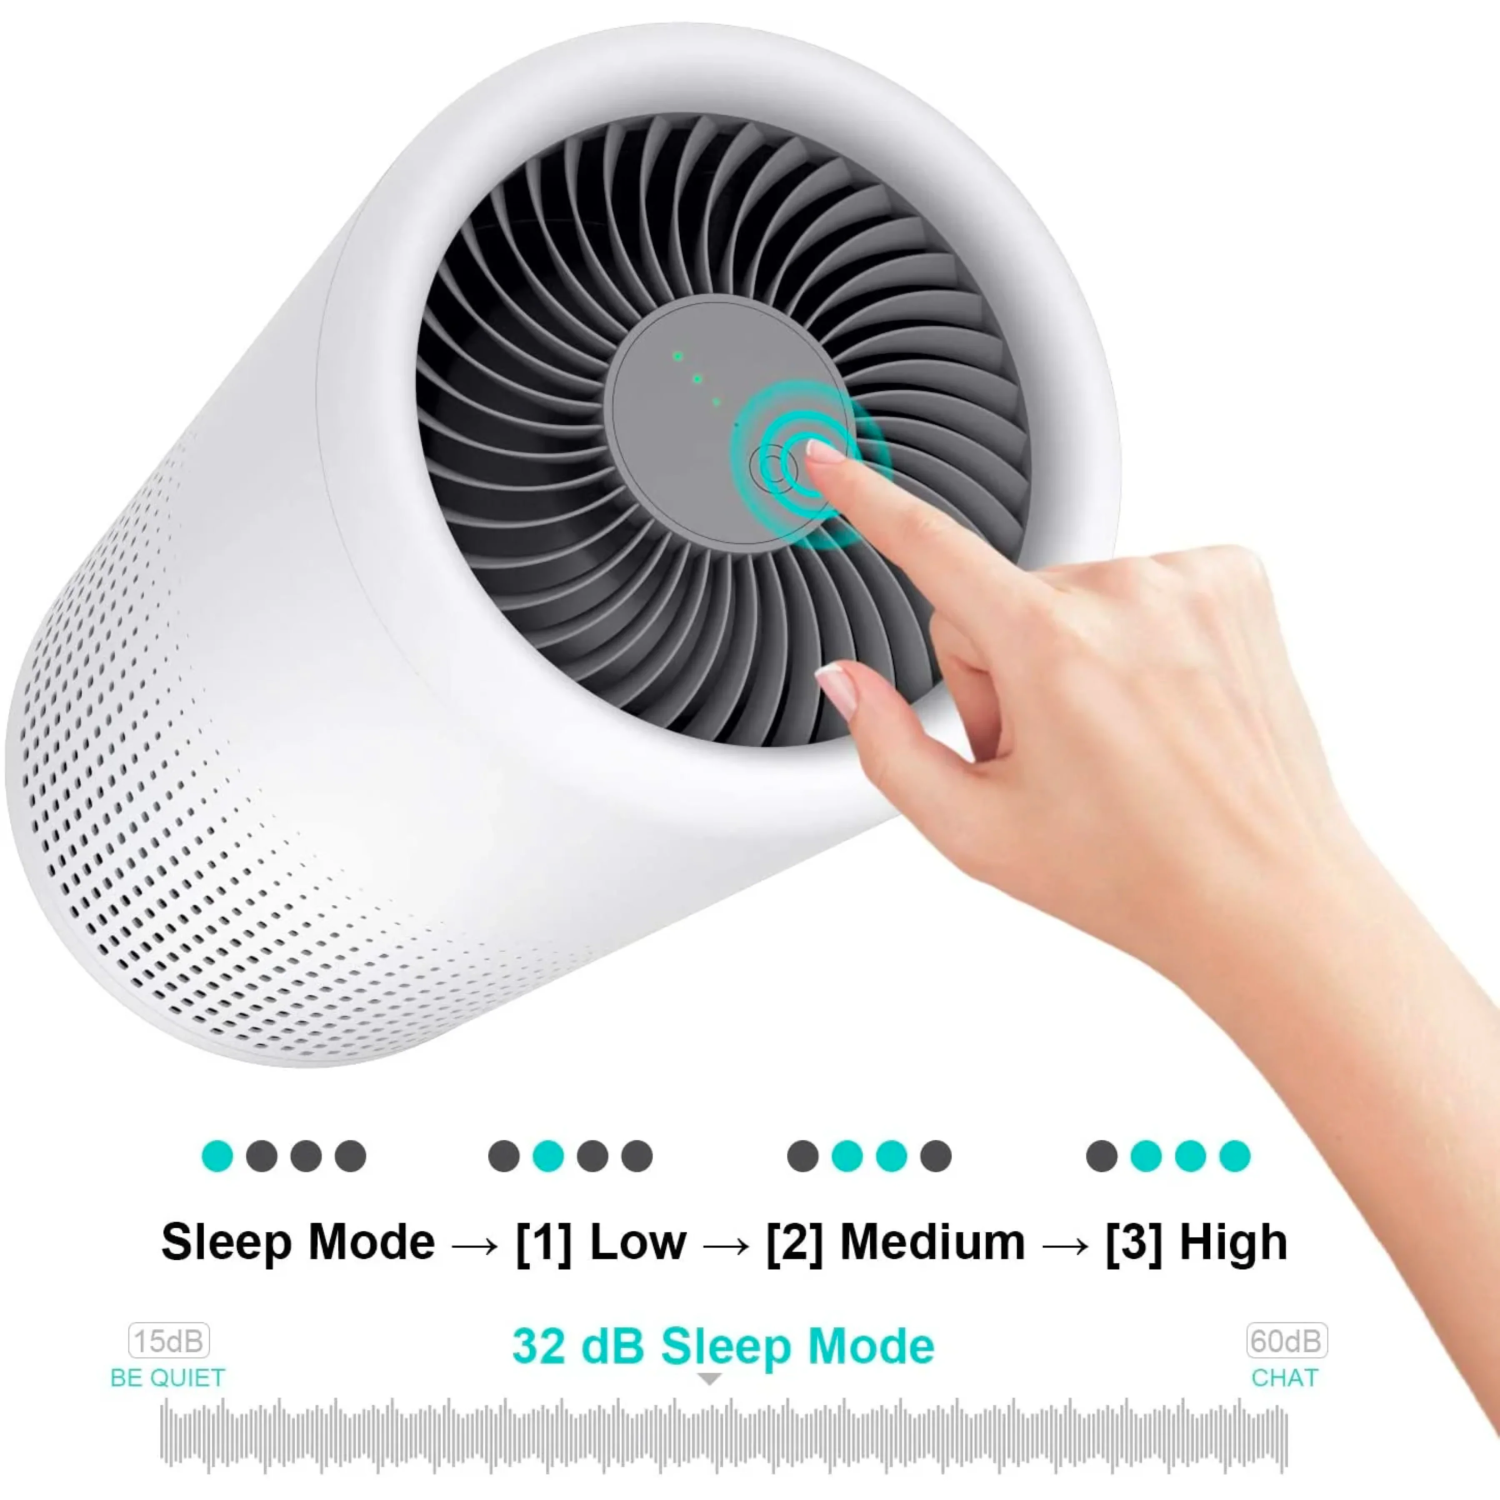 CLEVAST Air Purifiers, H13 True HEPA Air Filter with Japanese Motor, Low  Noise, 3-Stage Filtration System Remove 99.97% Smoke, Pollen, Dust, Come  With Extra Filter. Best Buy Canada